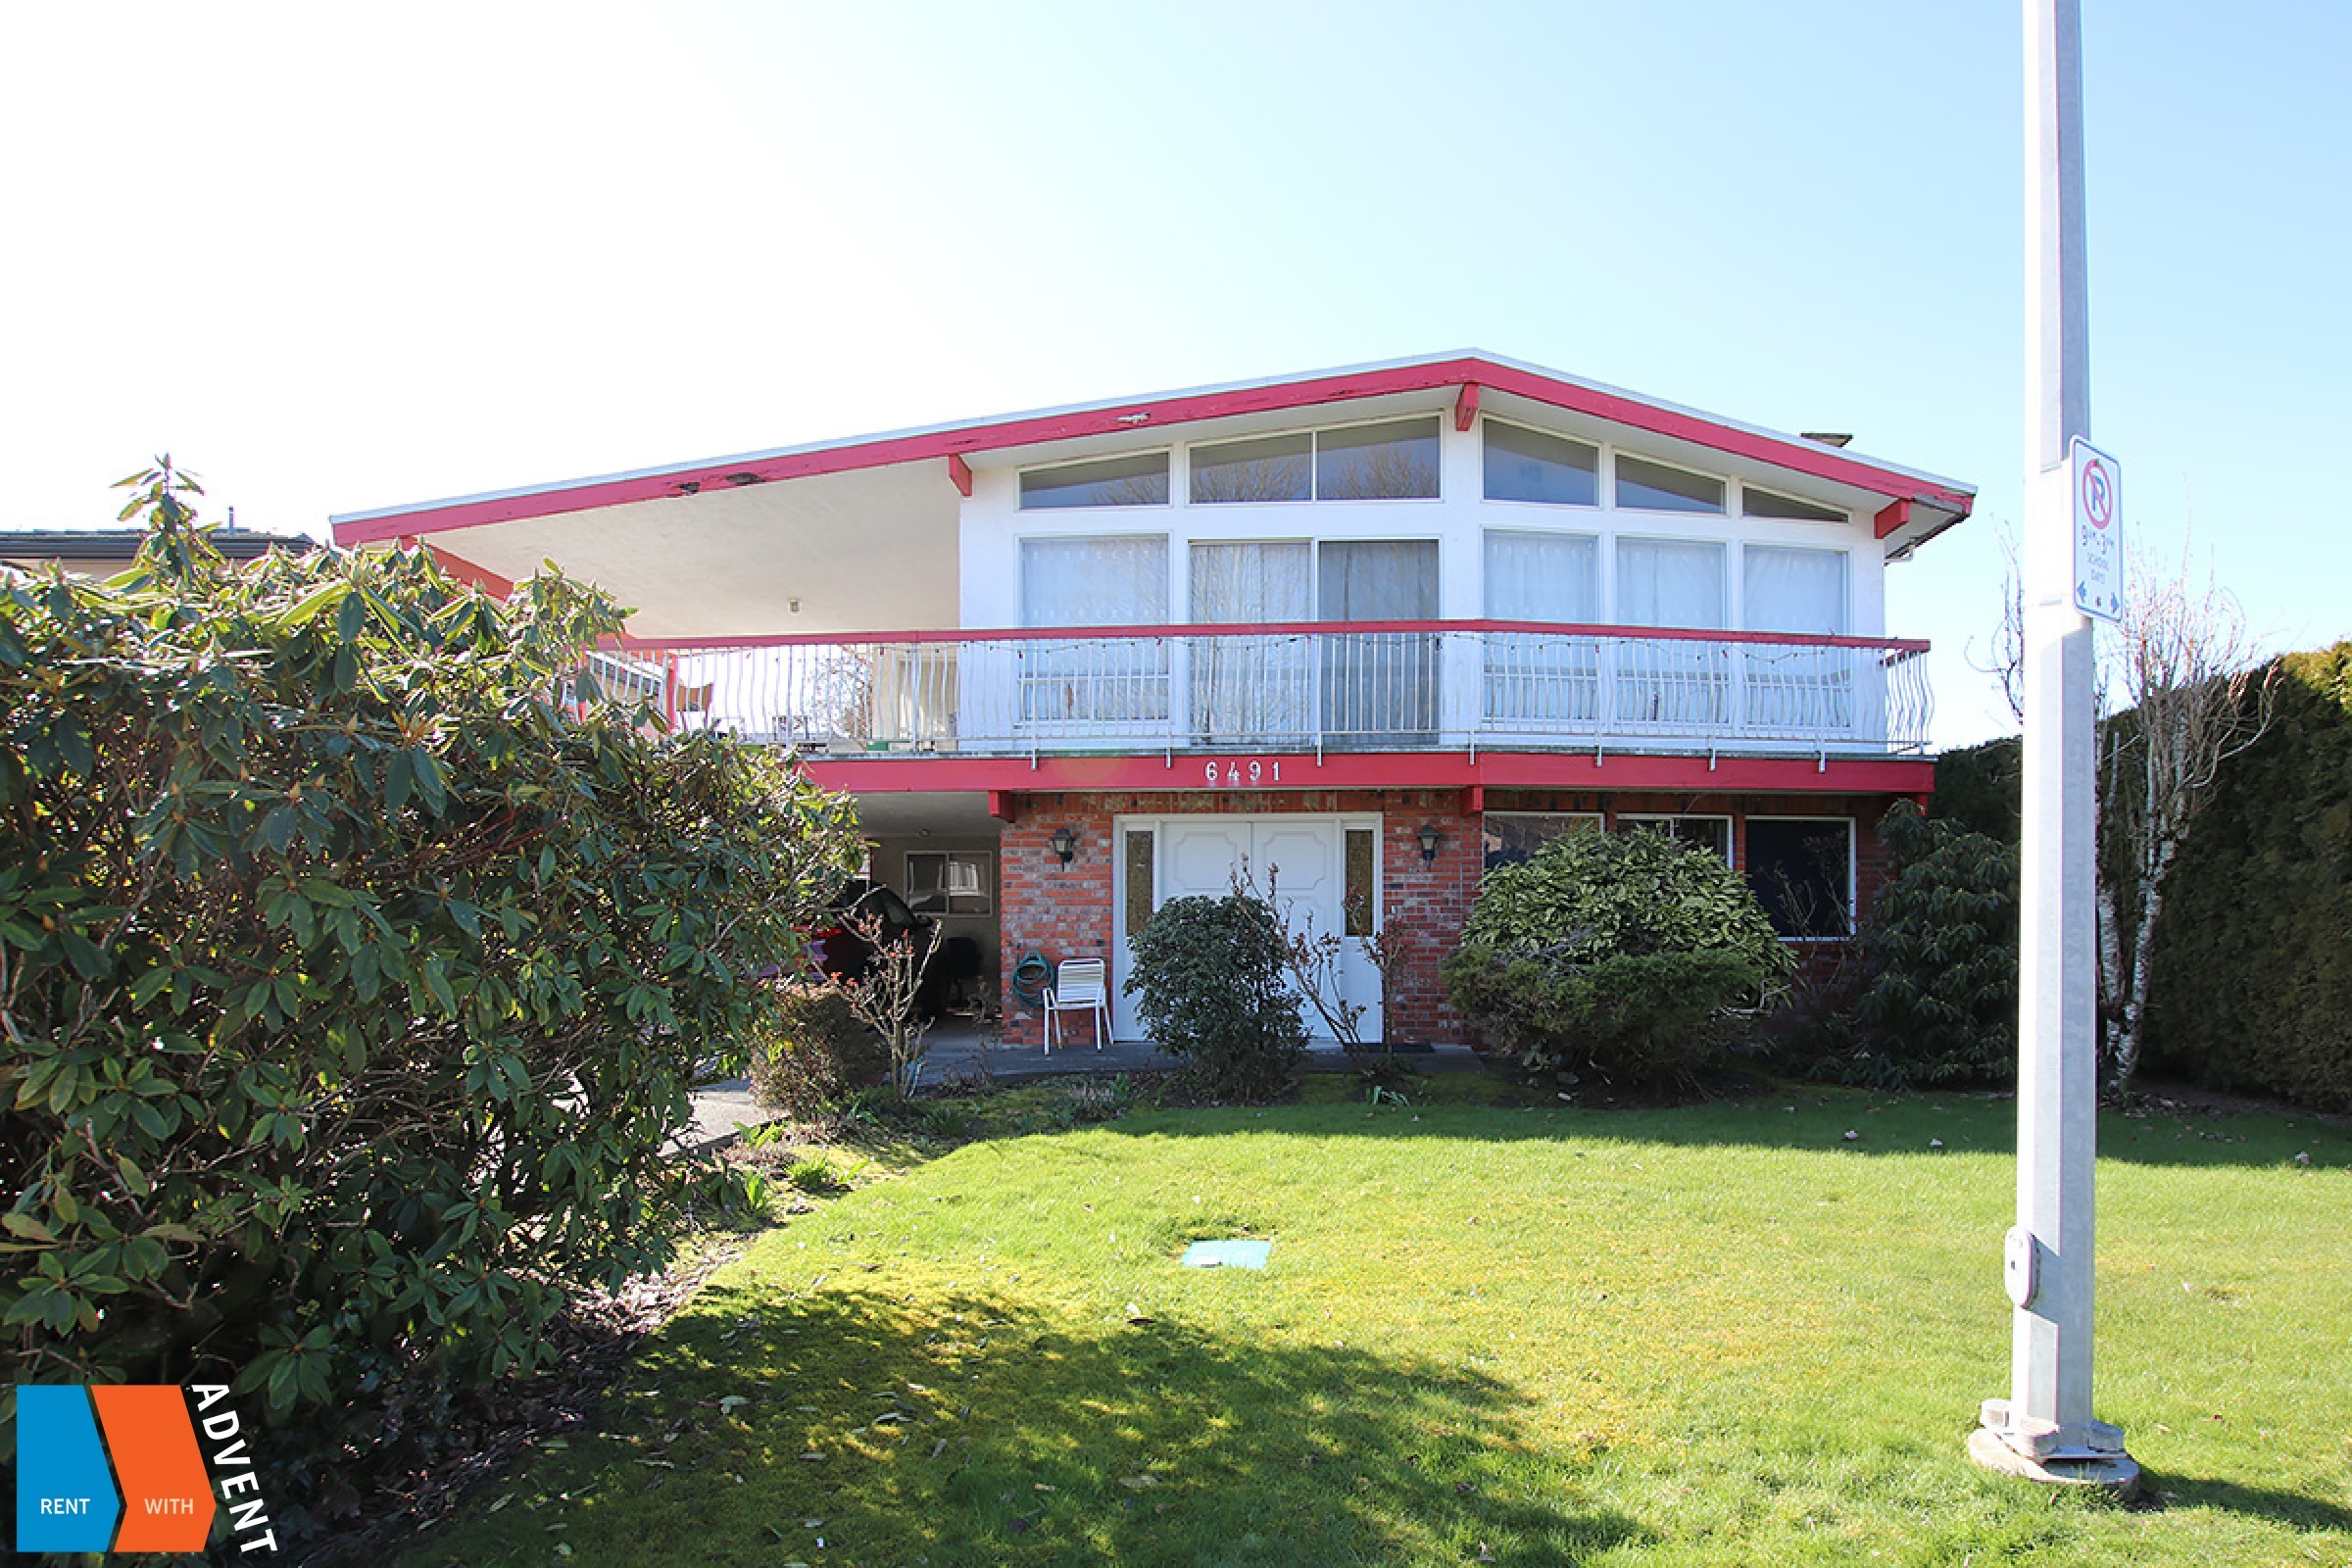 Unfurnished 2 Bedroom Lower Level of House For Rent in Richmond (Garden Suite). 6491B Gainsborough Drive, Richmond, BC, Canada.